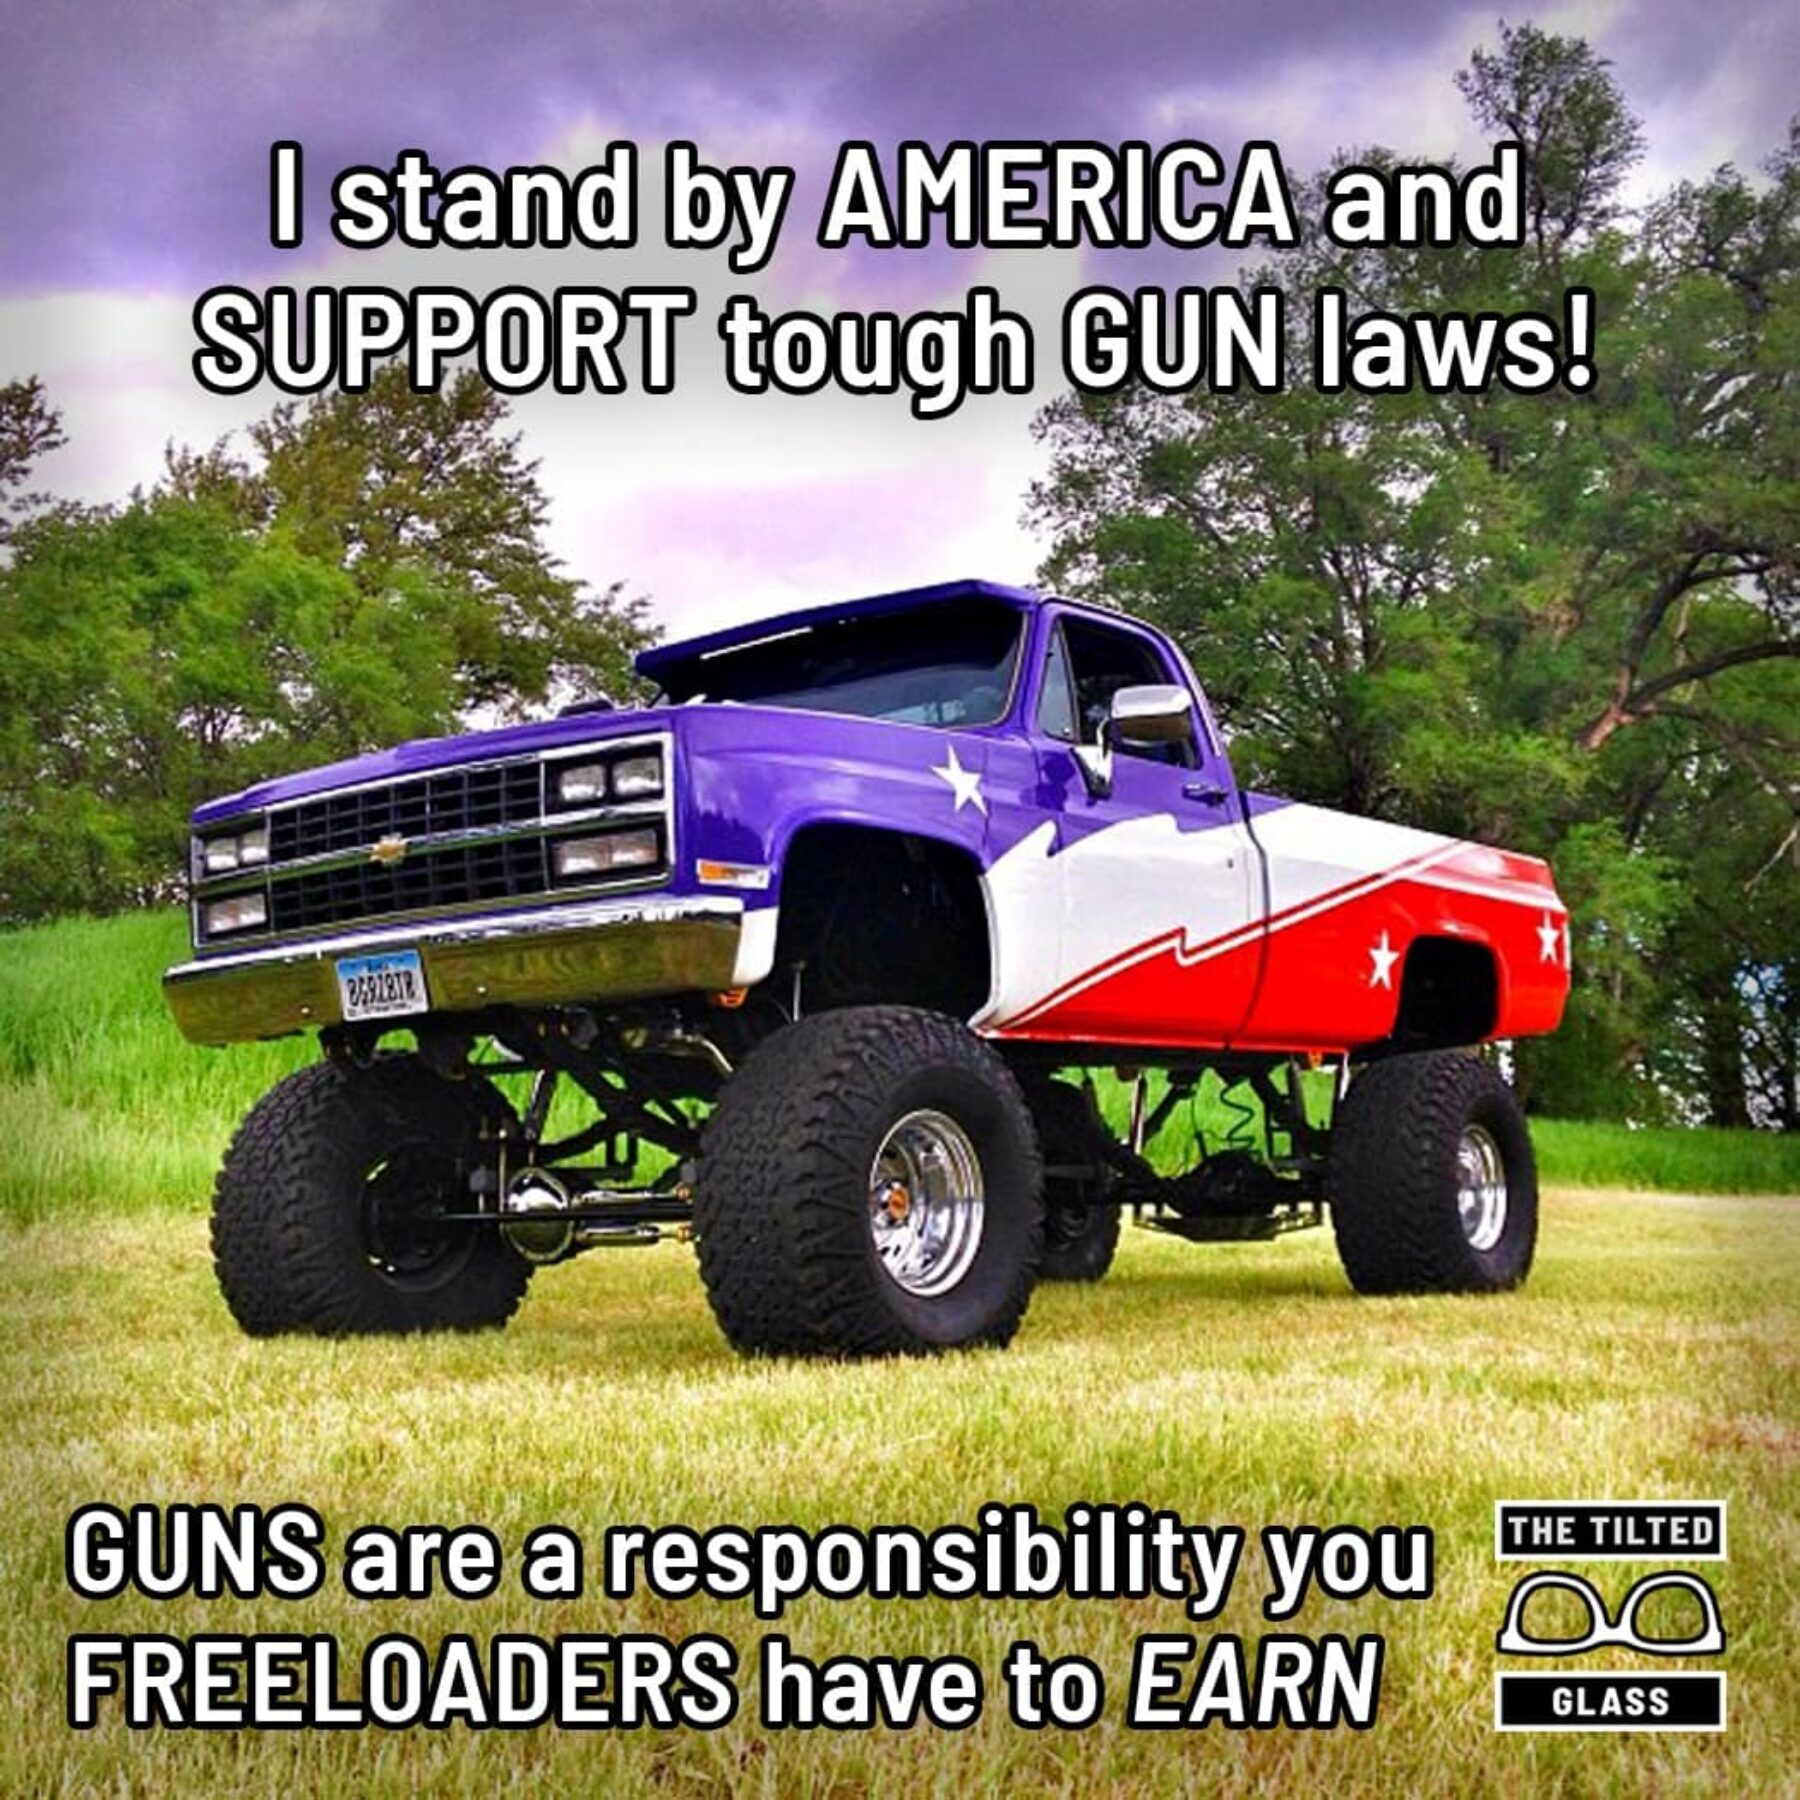 I stand by AMERICA and SUPPORT tough GUN laws!